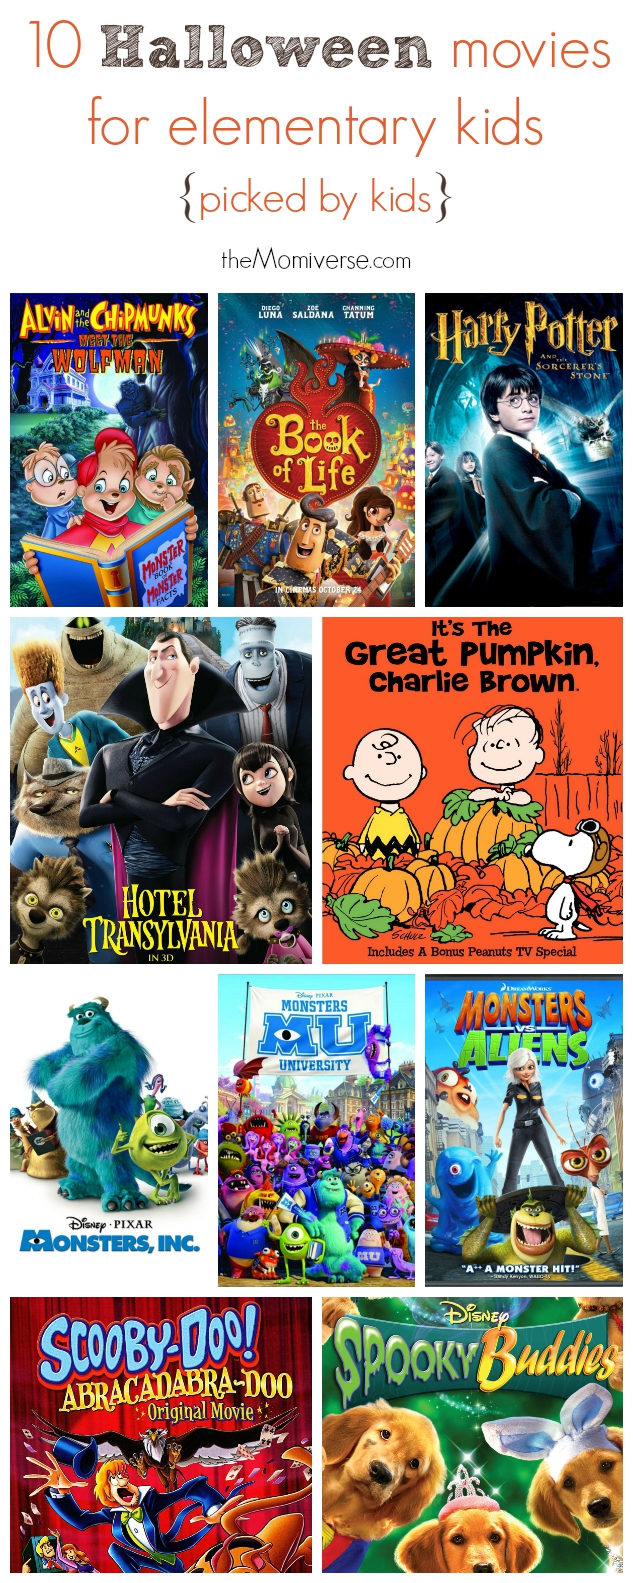 10 #Halloween movies for elementary kids | The Momiverse